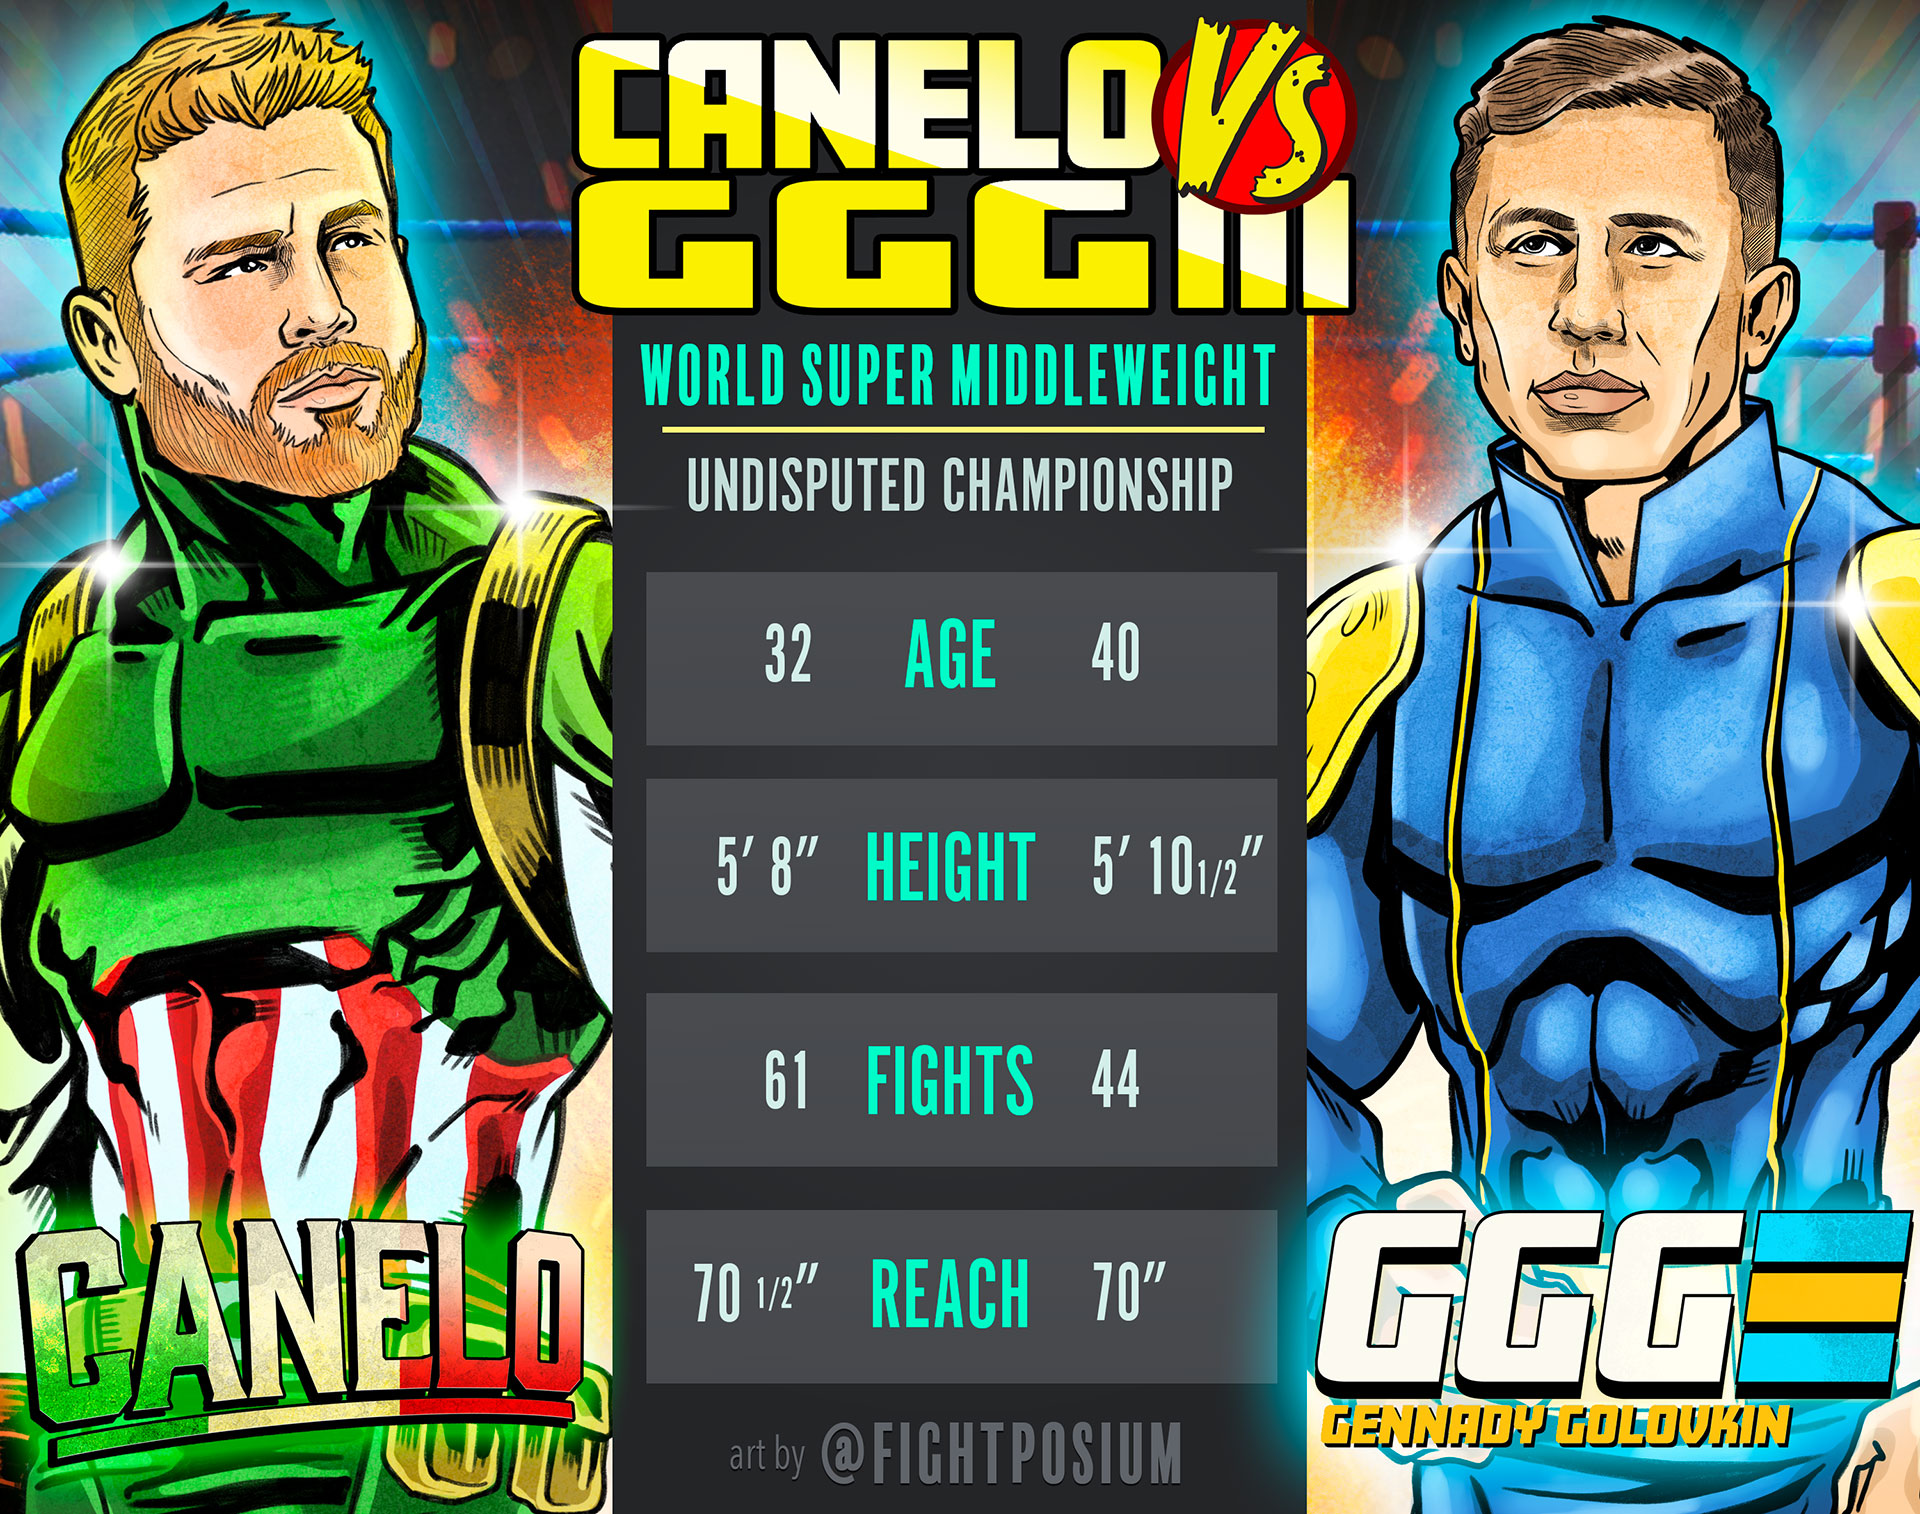 You are currently viewing Fightposium’s Canelo VS GGG III – Tale of the Tape!